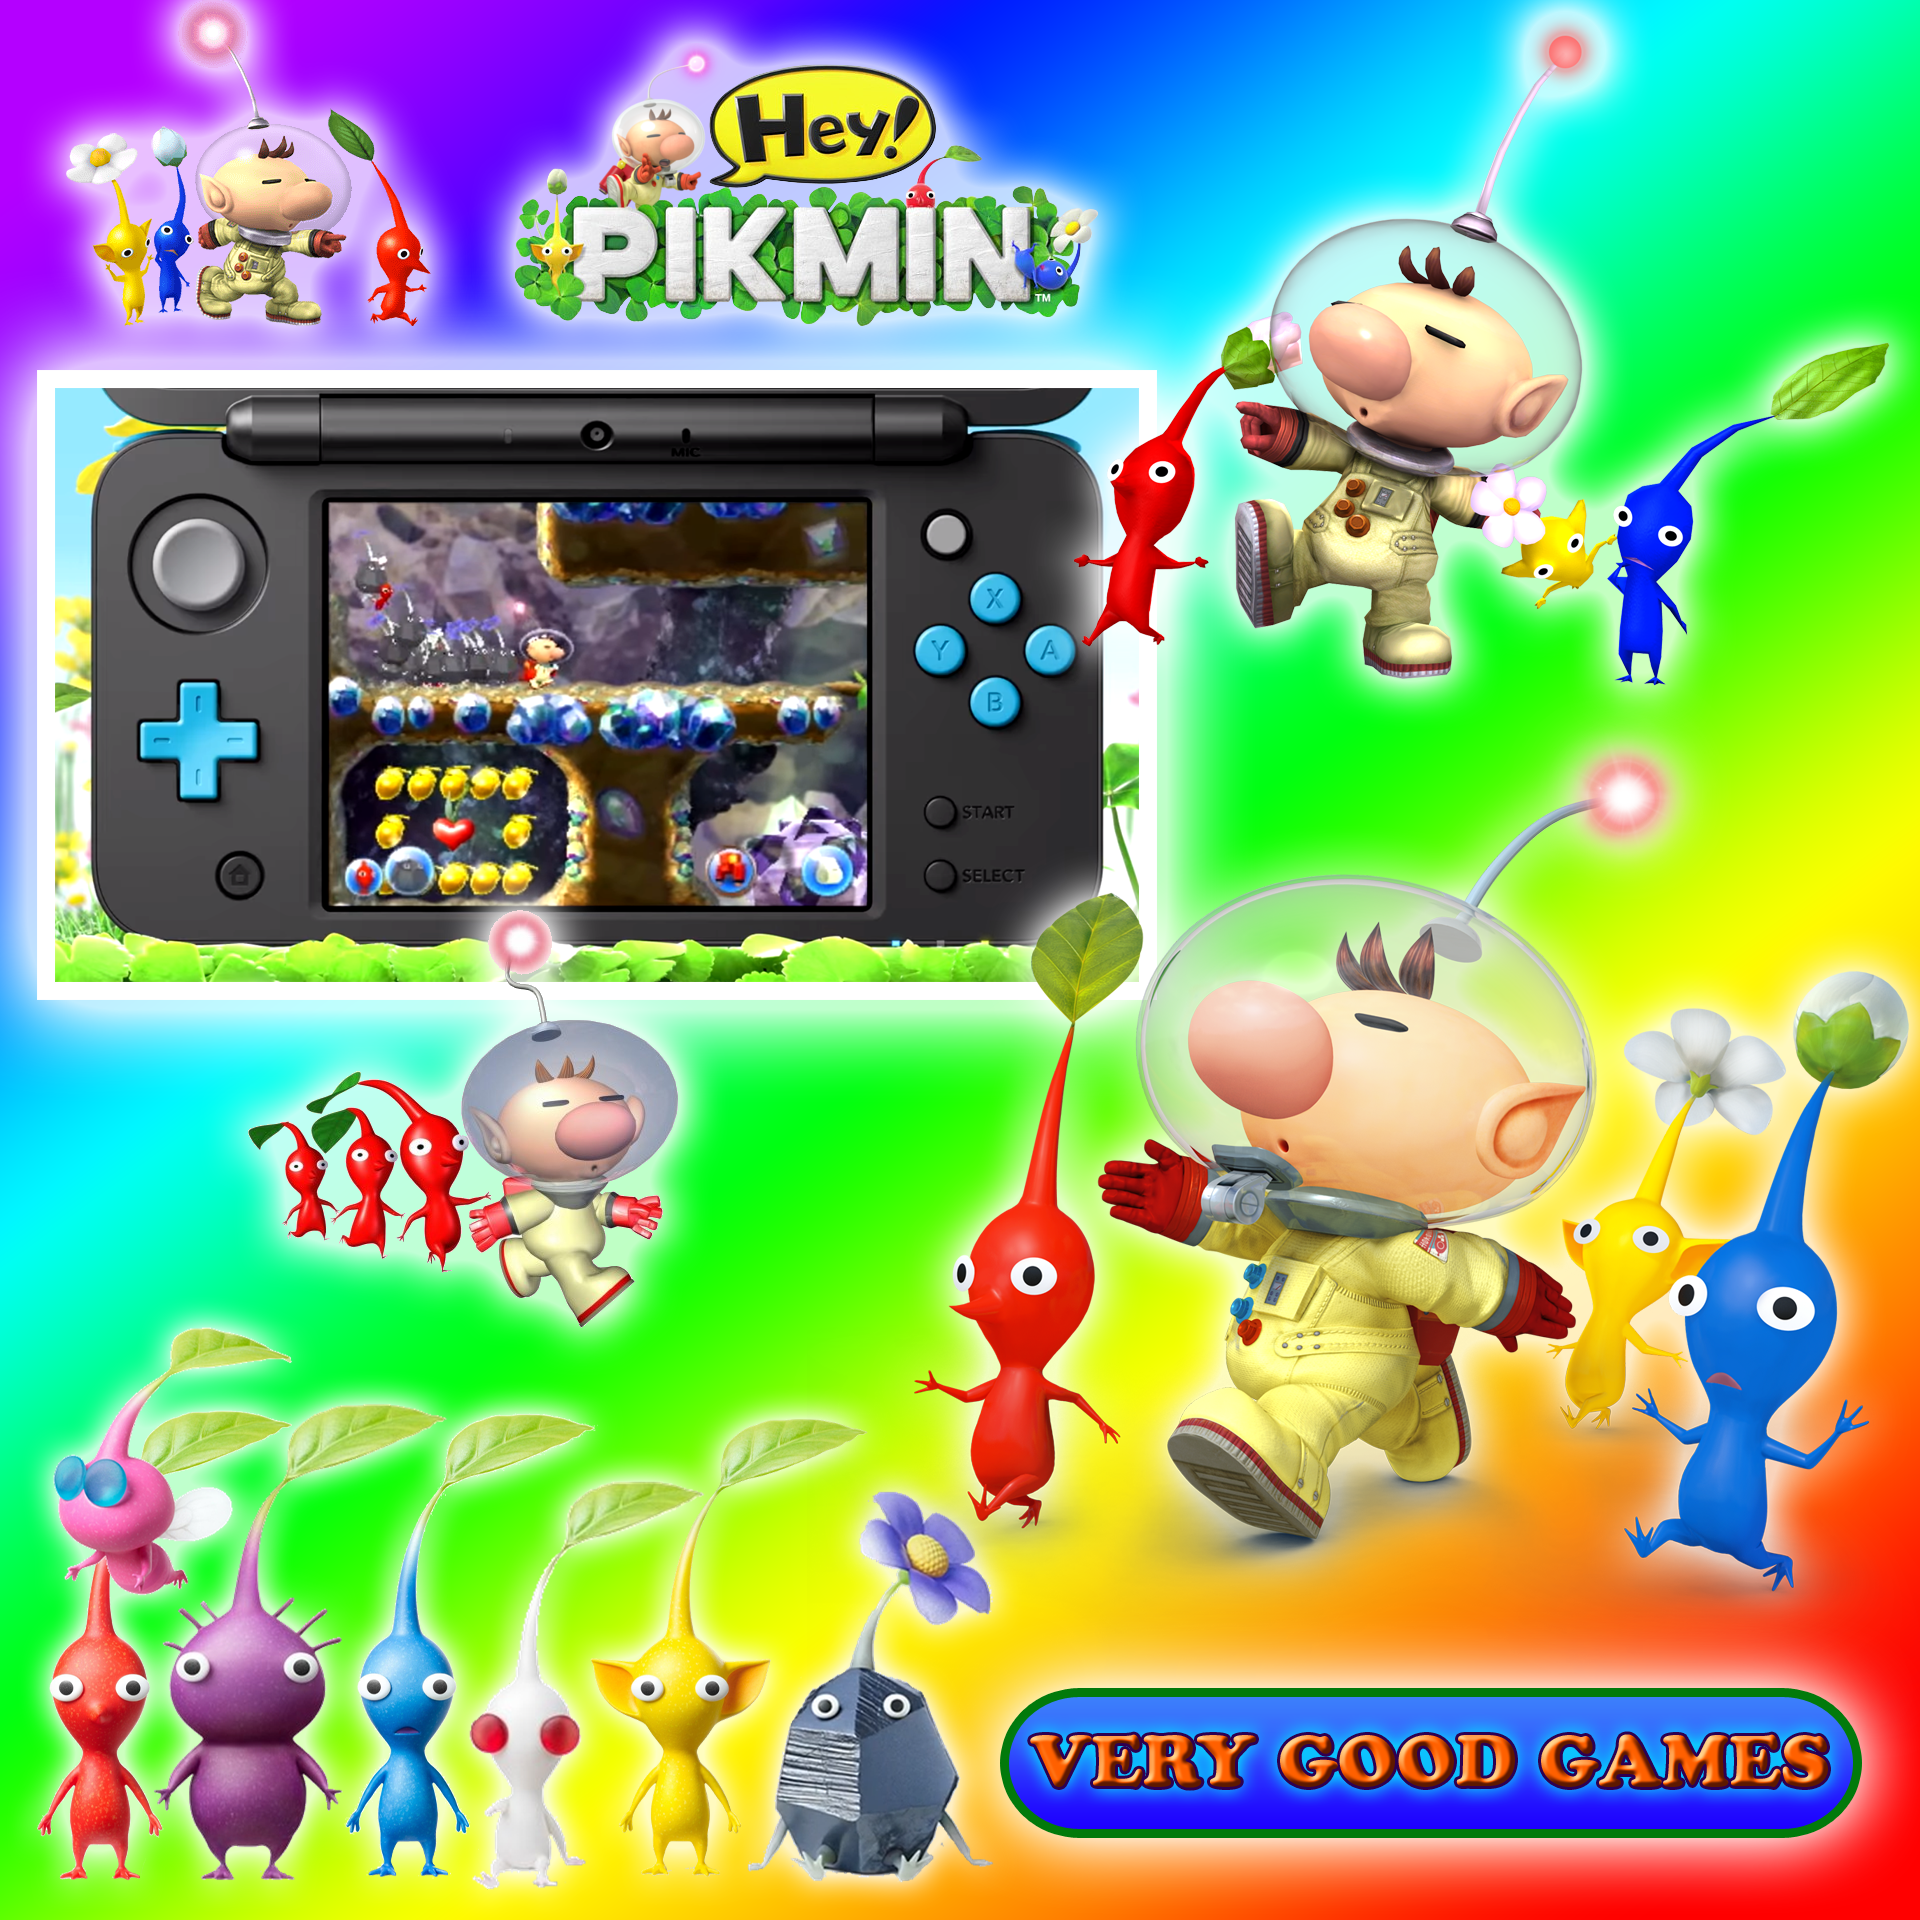 A banner with heroes of the Hey! Pikmin game - Pikmin and Captain Olimar